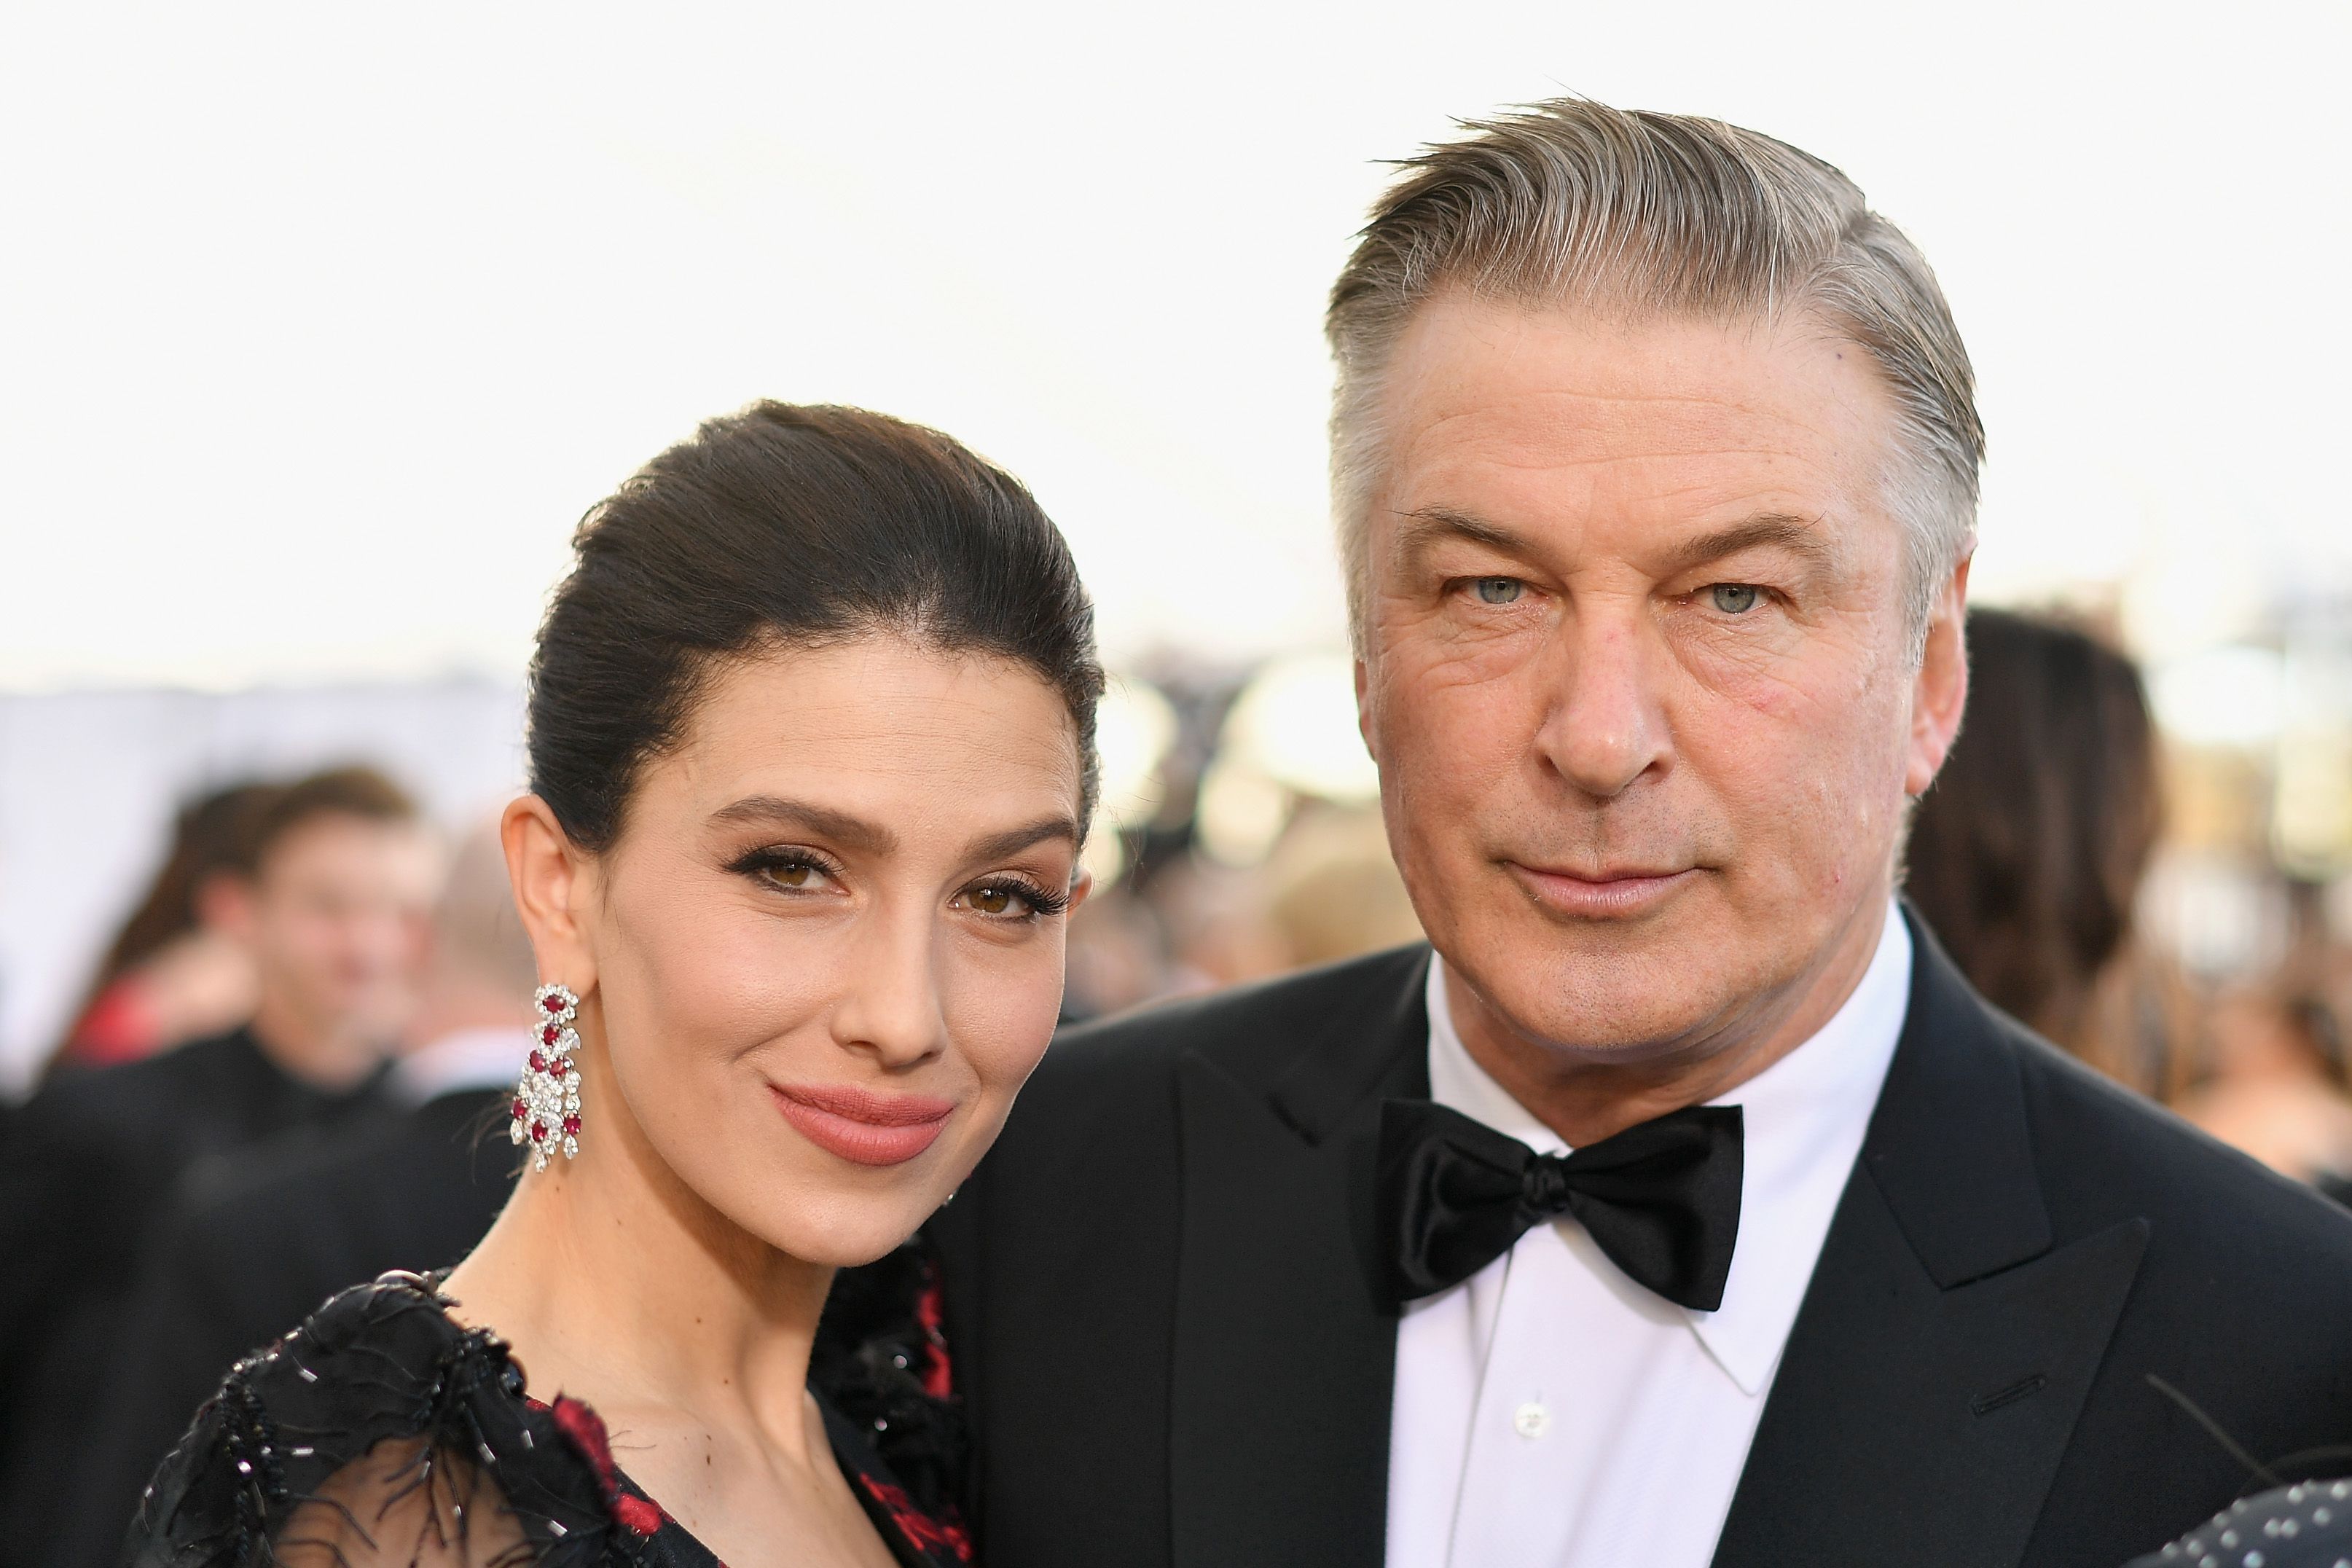 Hilaria and Alec Baldwin at the 25th Annual Screen Actors Guild Awards in January 2019 in Los Angeles | Source: Getty Images